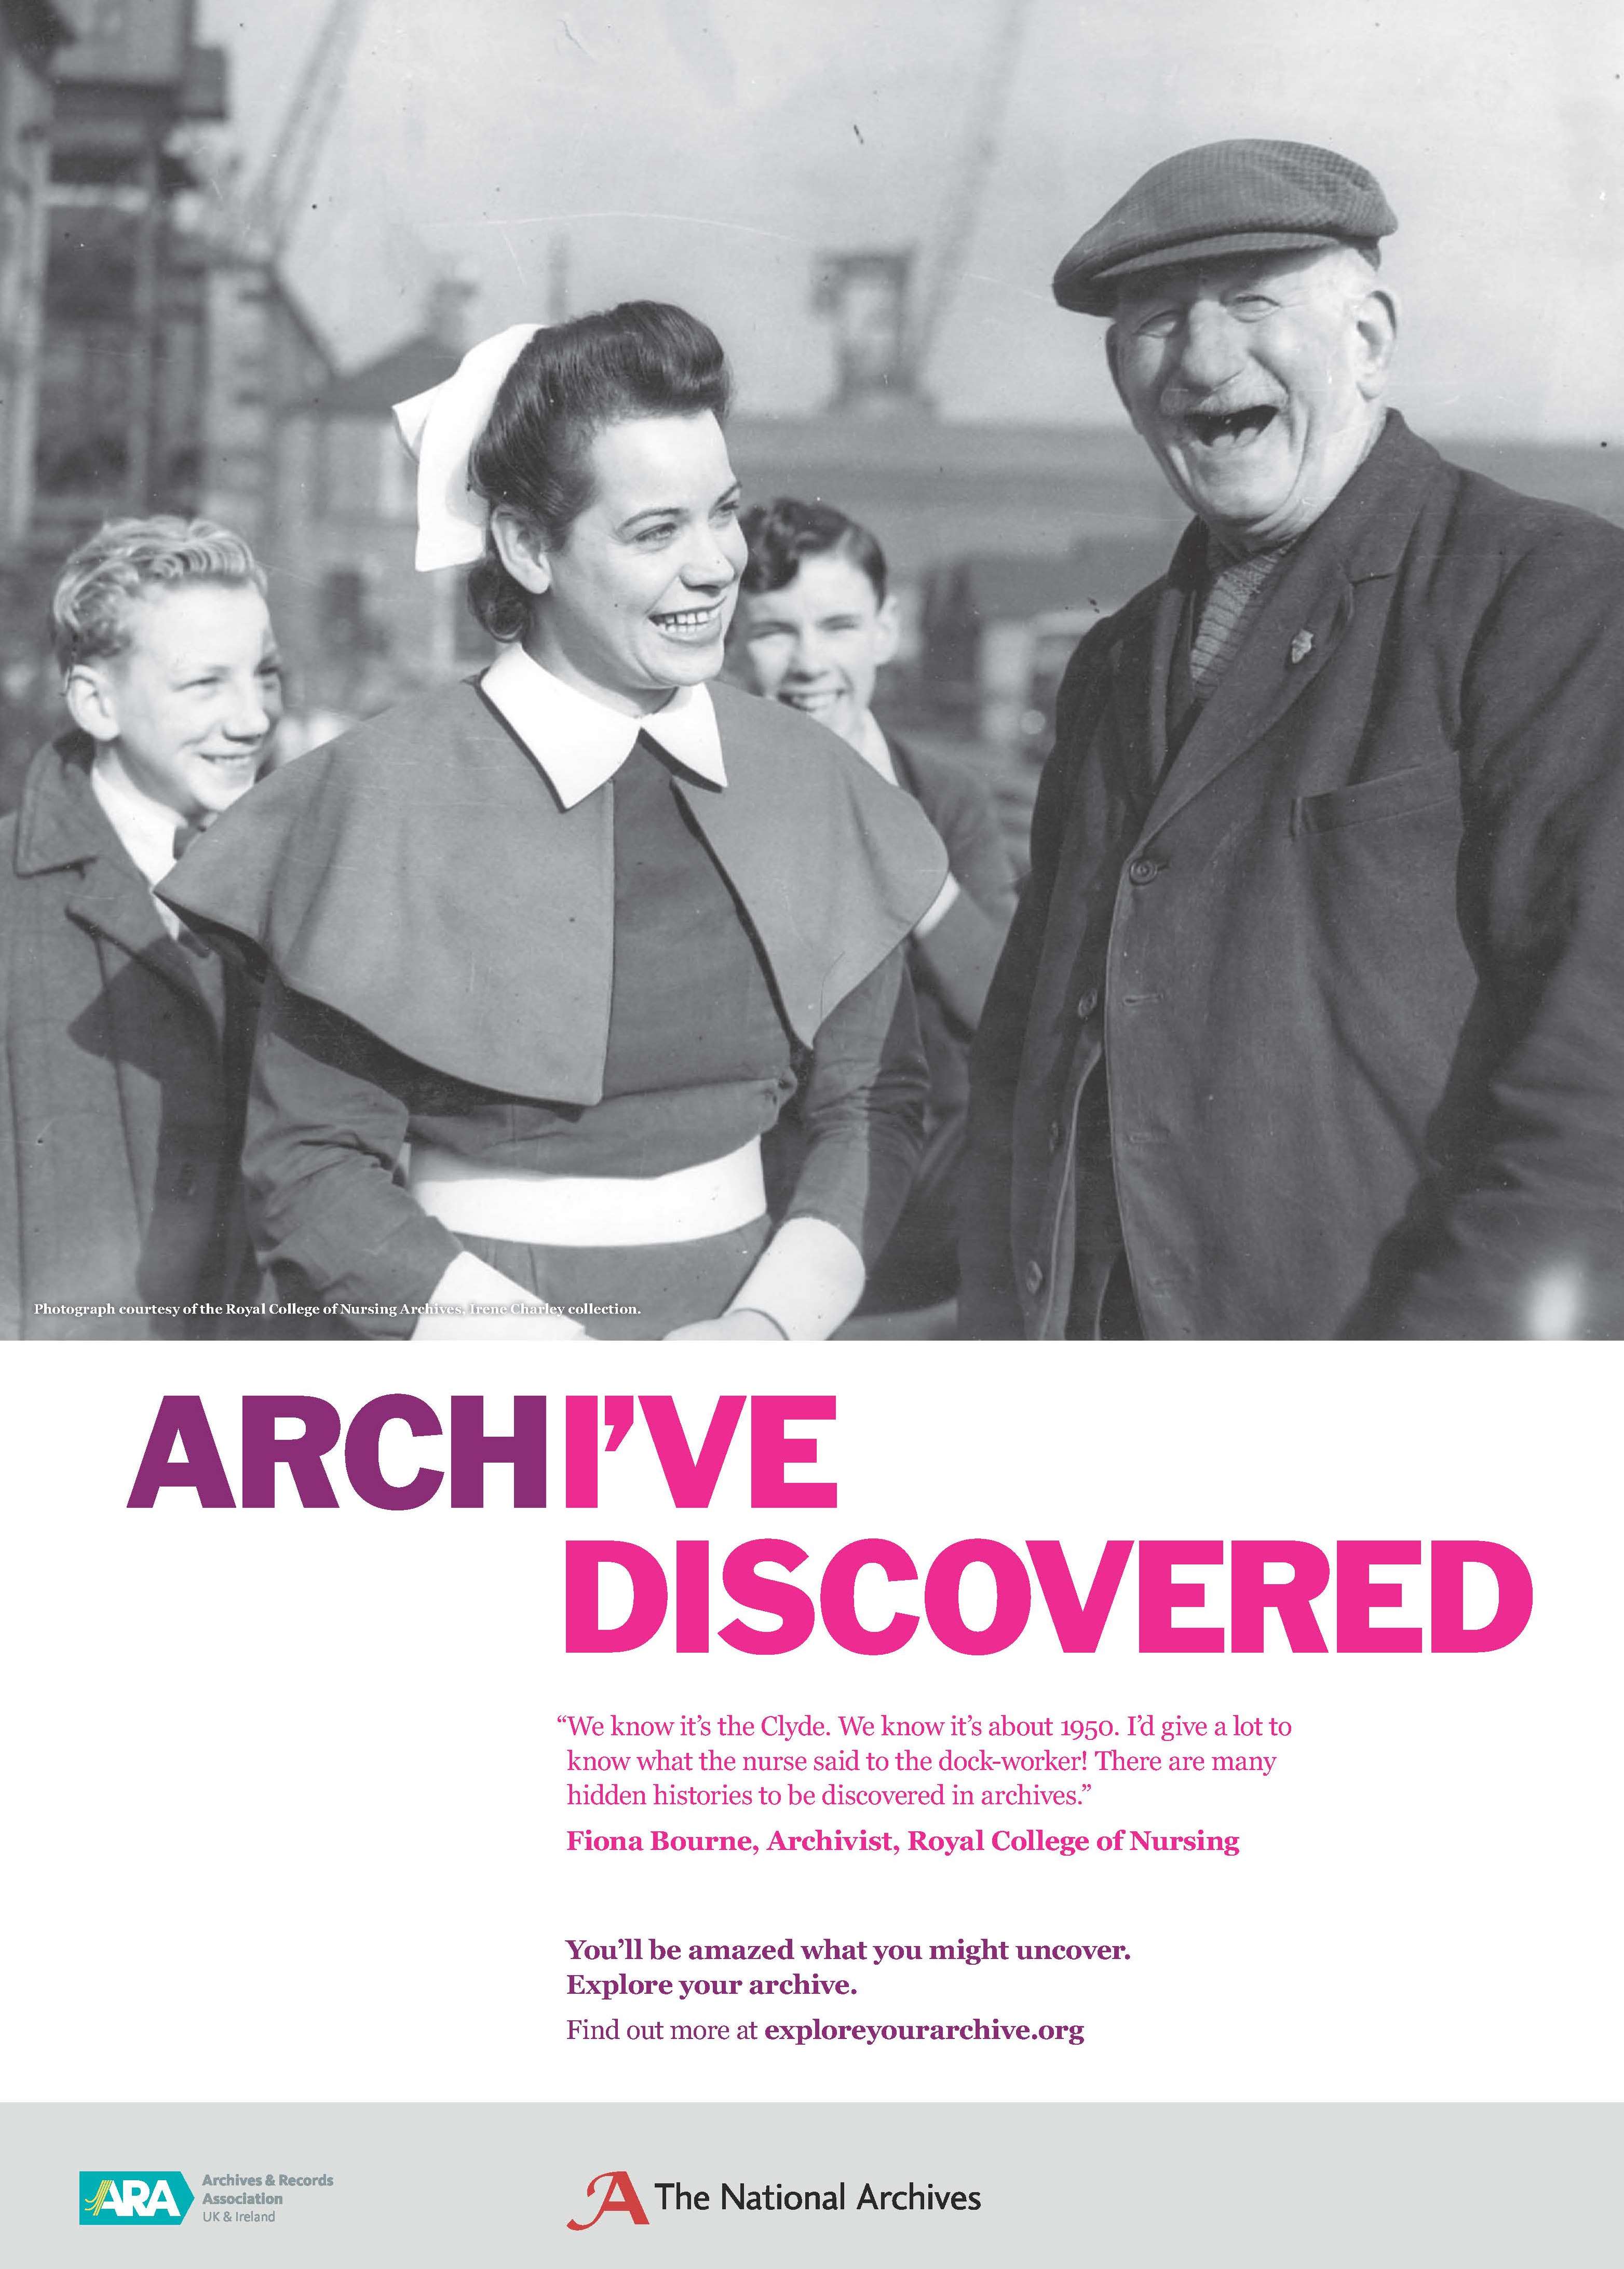 We support the archives campaign